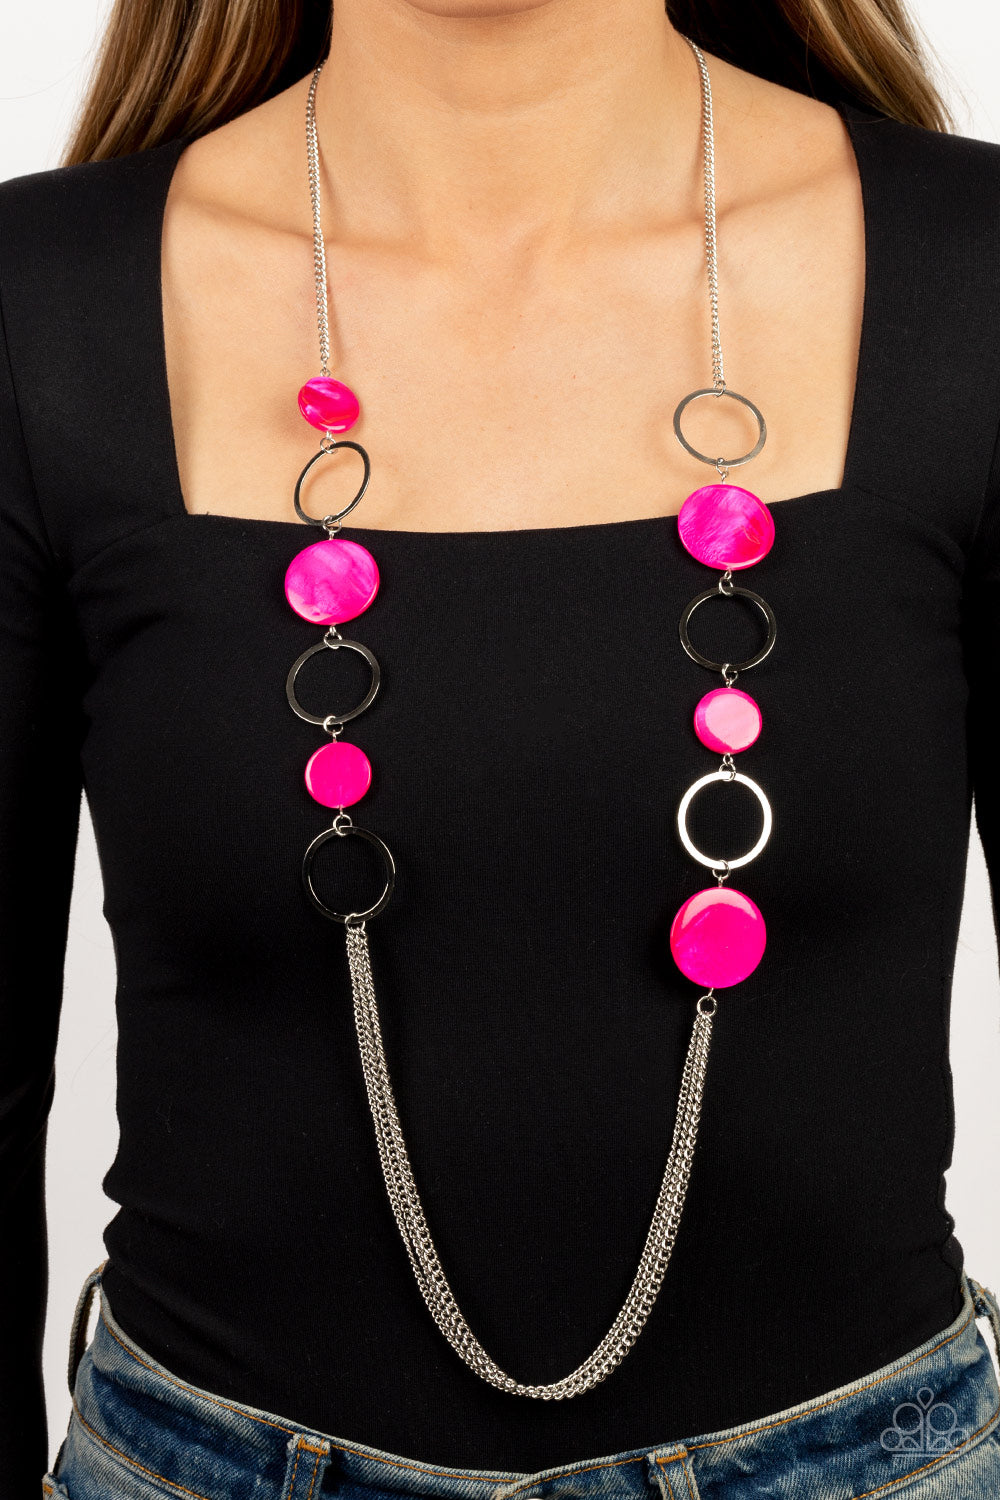 Beach Hub Paparazzi Accessories Necklace with Earrings - Pink